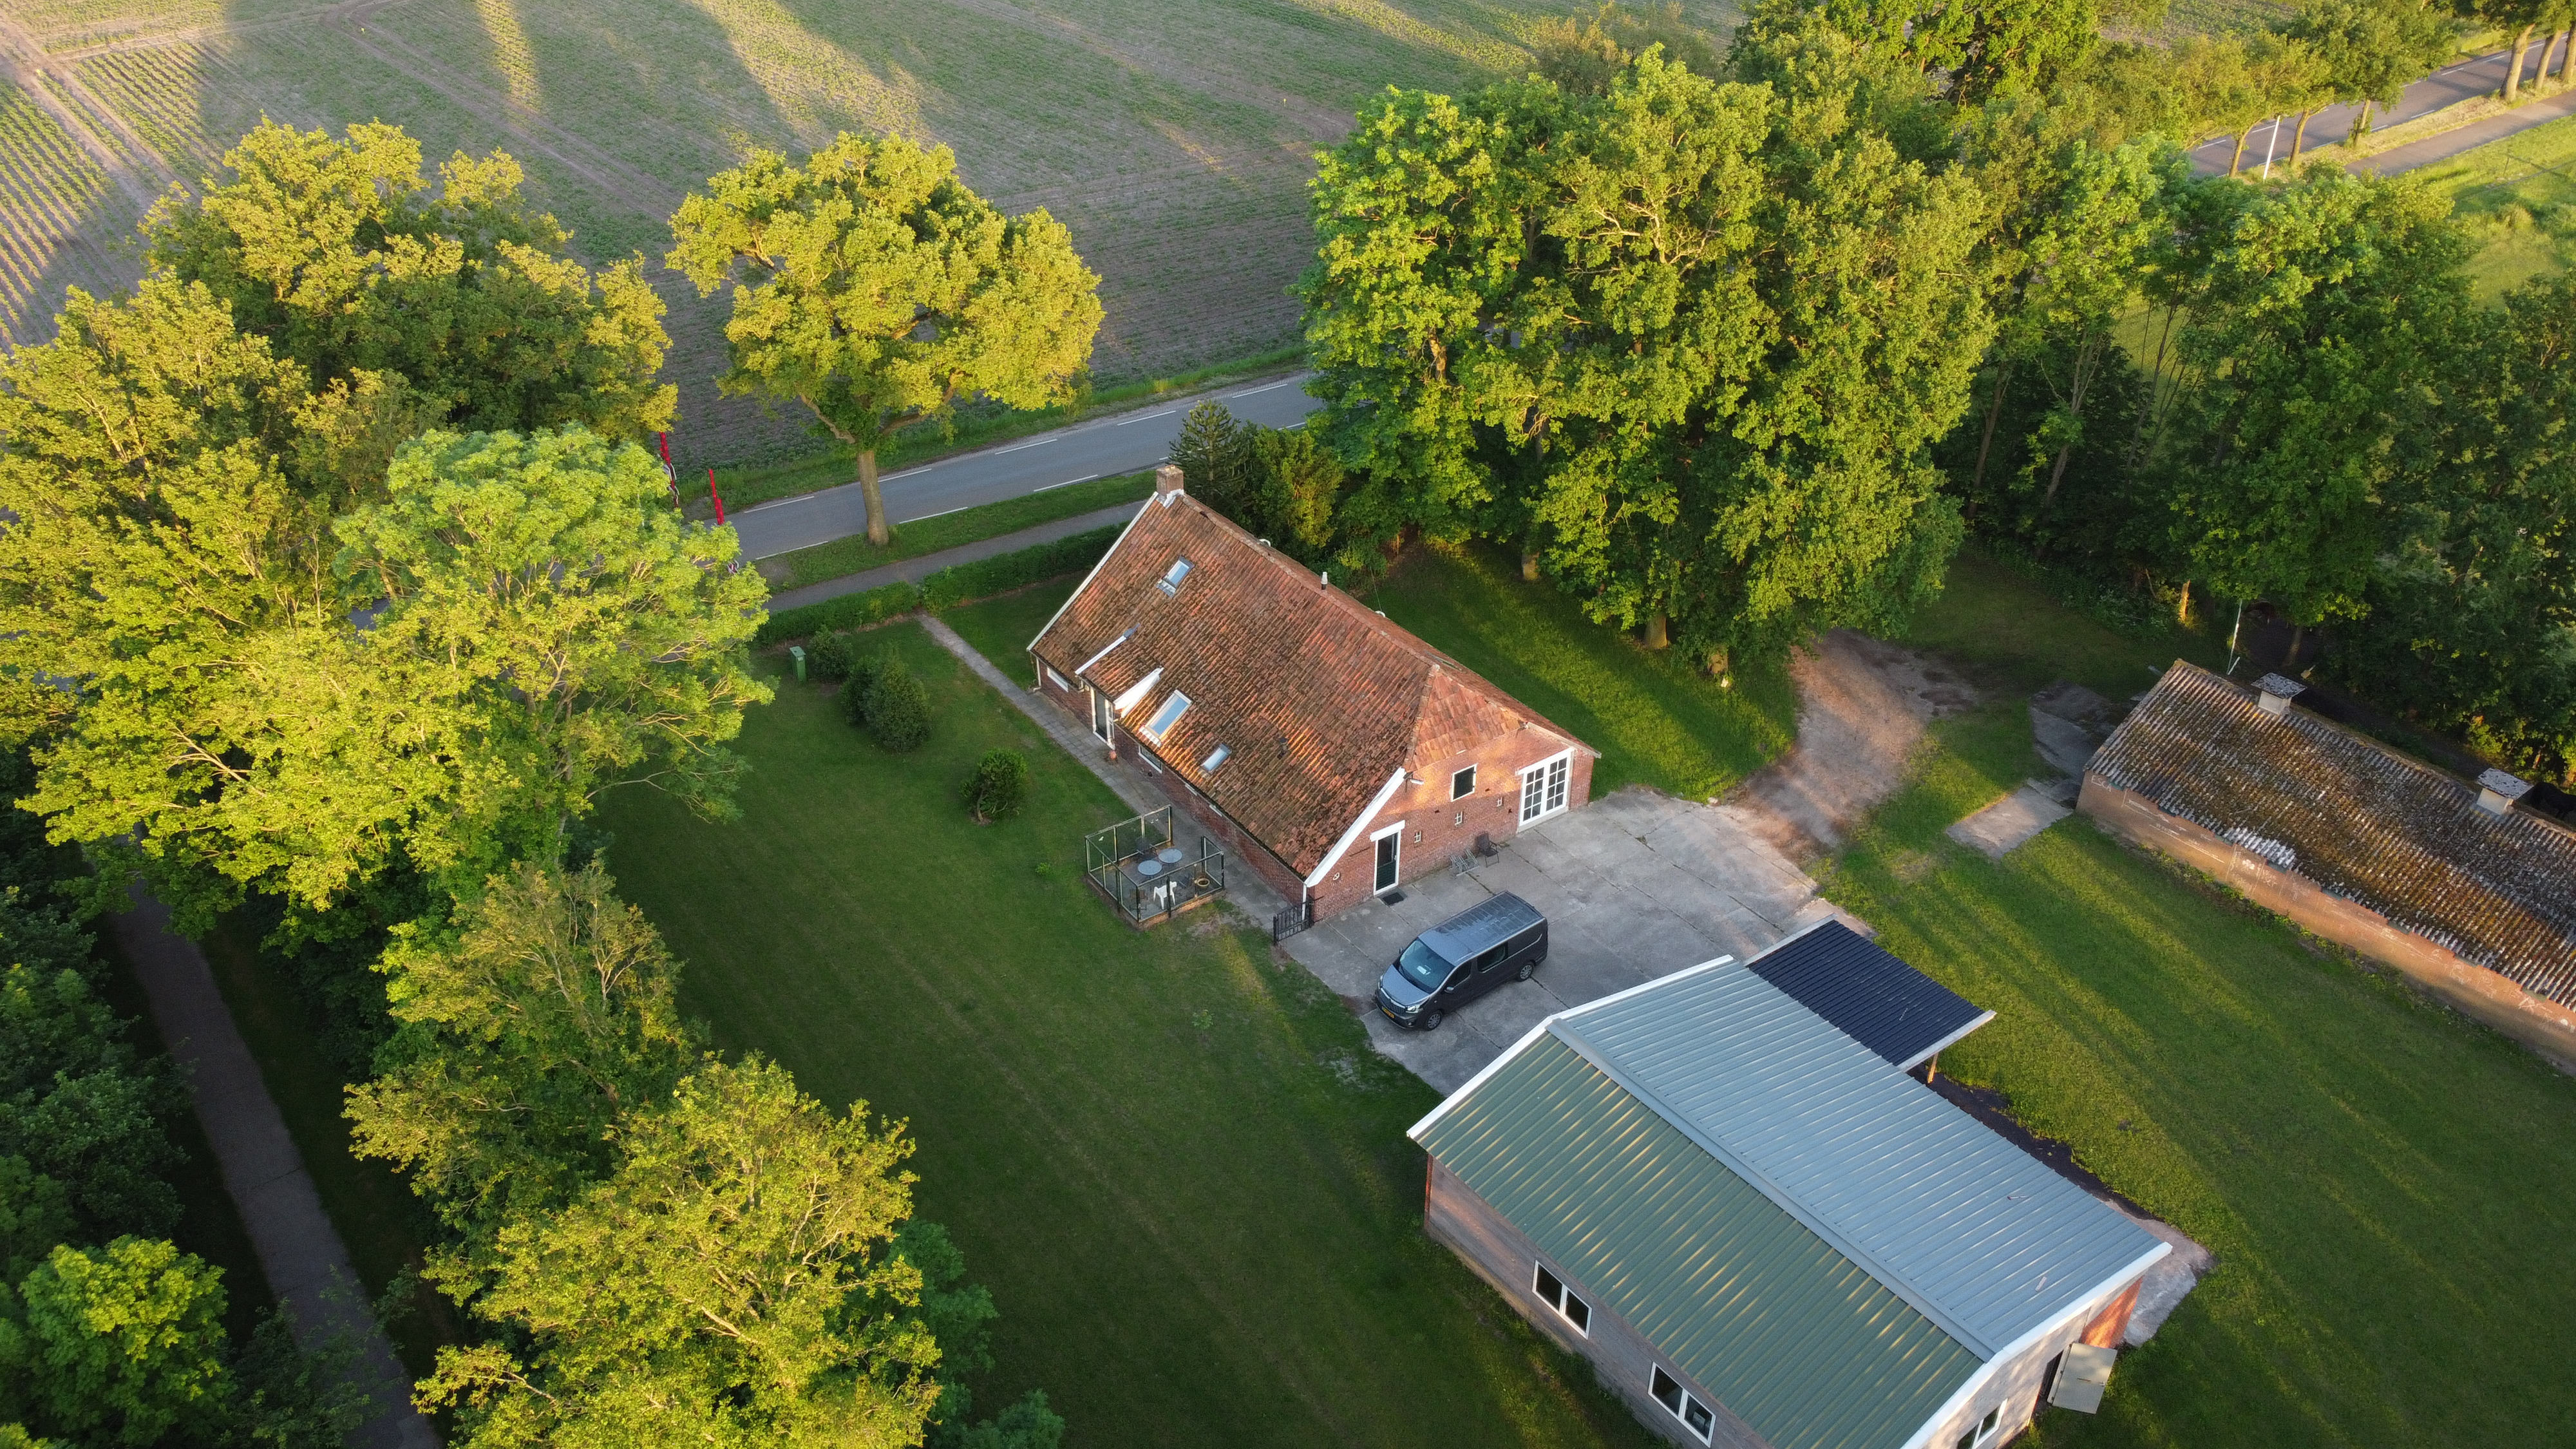 Aerial image of the farmhouse